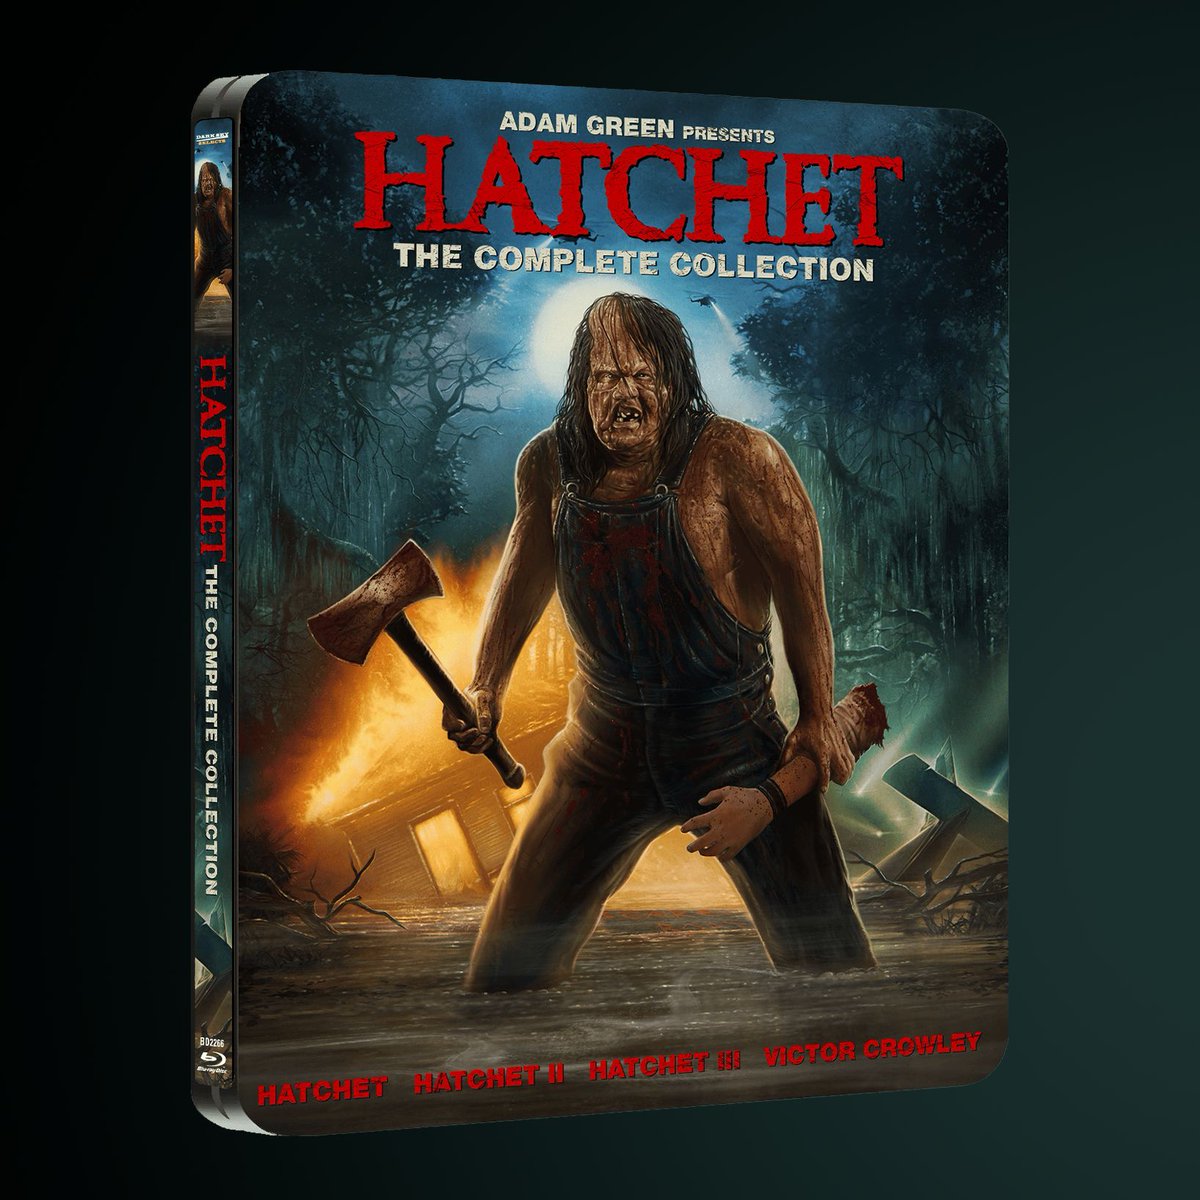 The first official release is HATCHET: THE COMPLETE COLLECTION, a 5-disc Blu-ray Limited Edition #Steelbook featuring all 4 films for the first time ever. 

Available June 25. Pre-Order now exclusively here: buff.ly/3UHUTWx 

#Darkskyselects #bluray #steelbook #preorder